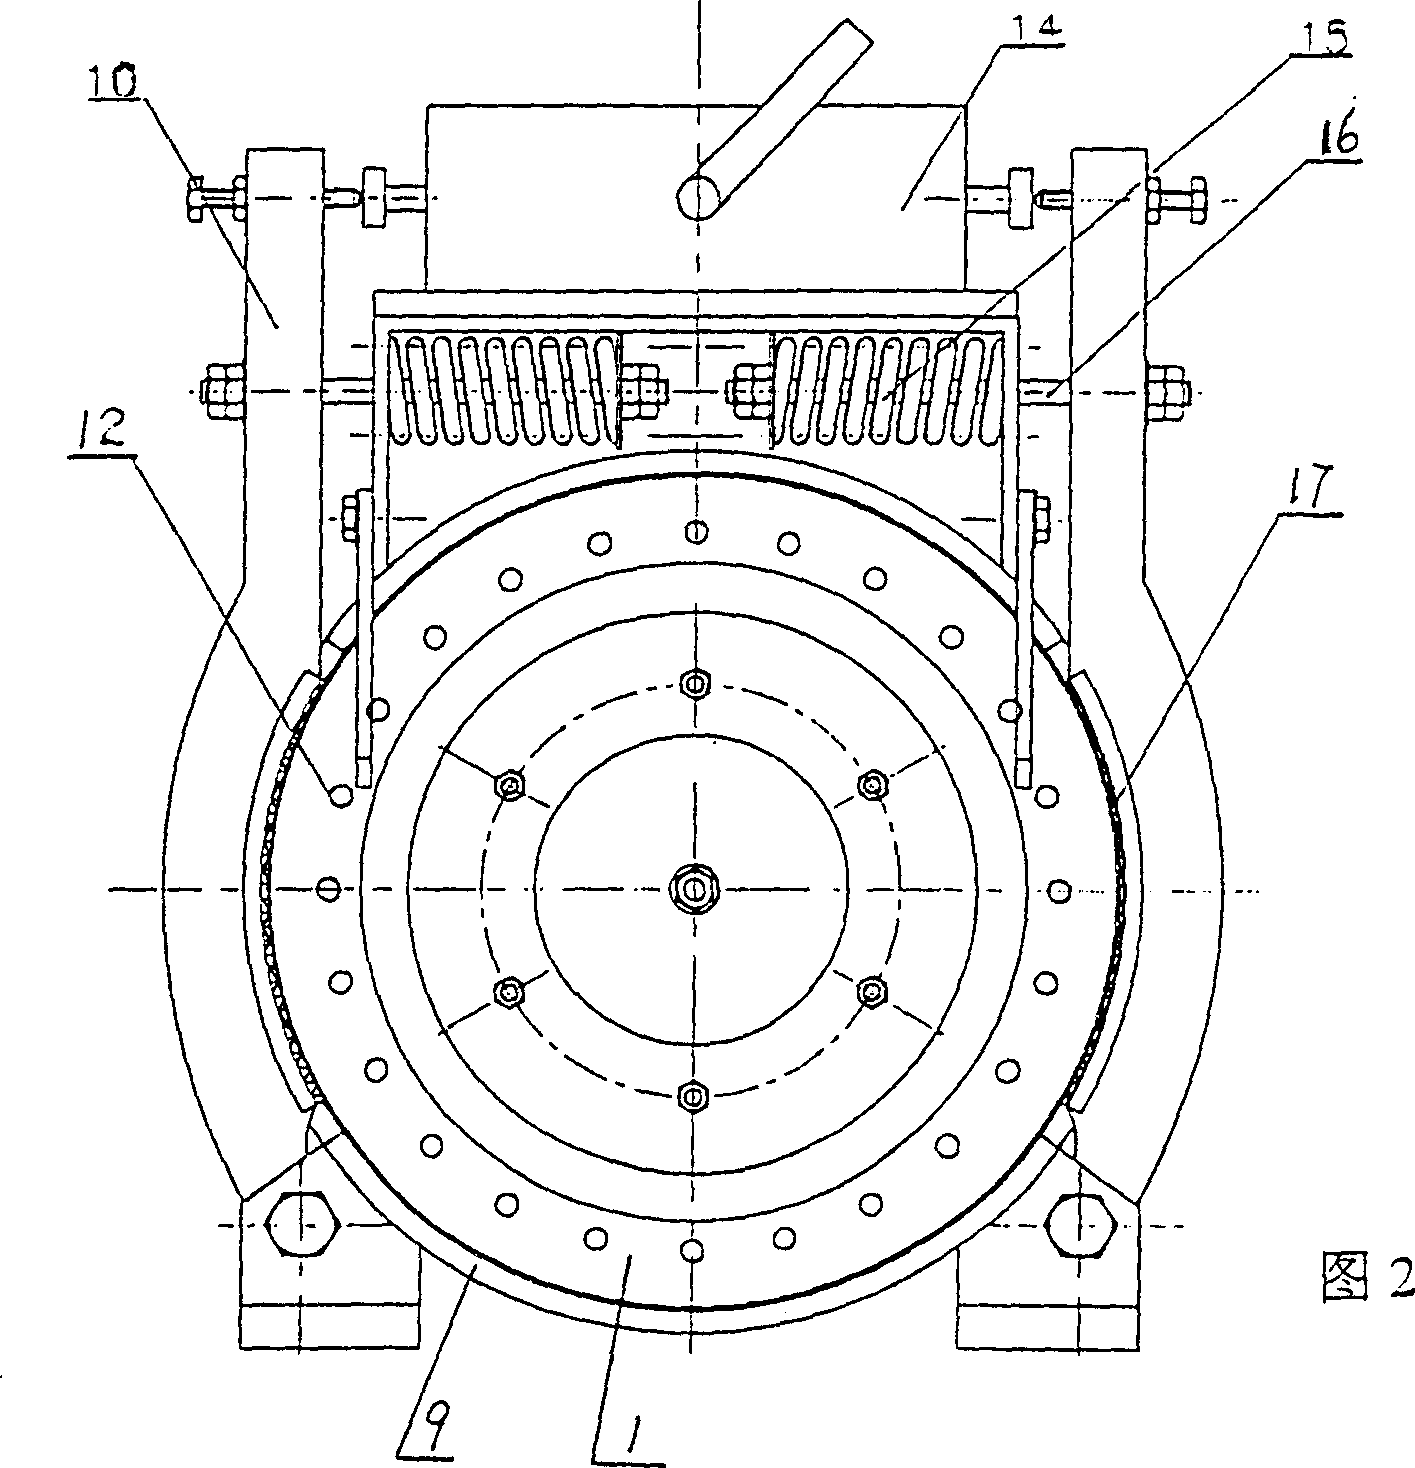 Directly driven synchronous dragger with Nd-Fe-B permanent magnetic rotor